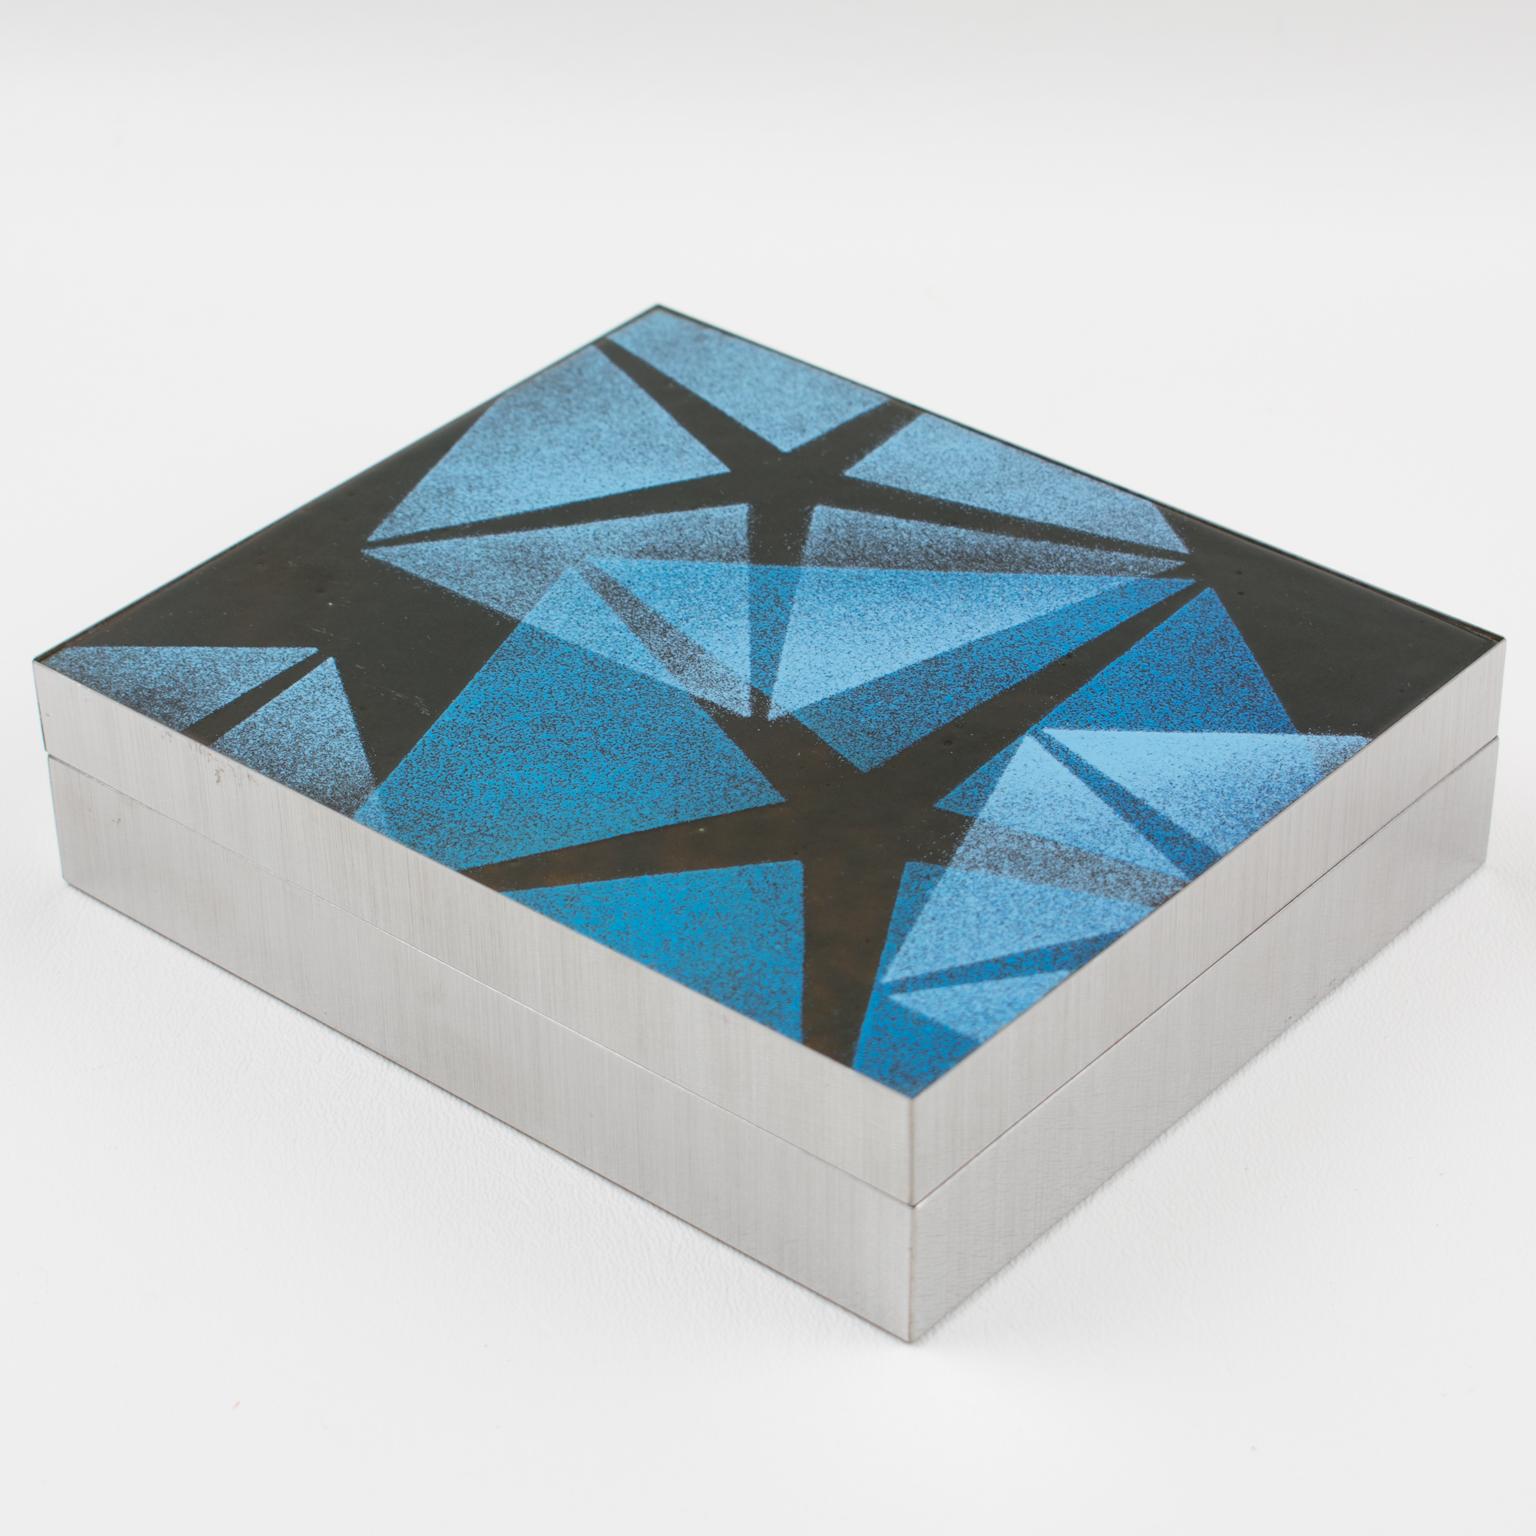 Late 20th Century Mid-Century Brushed Aluminum and Blue Enamel Box, 1970s For Sale